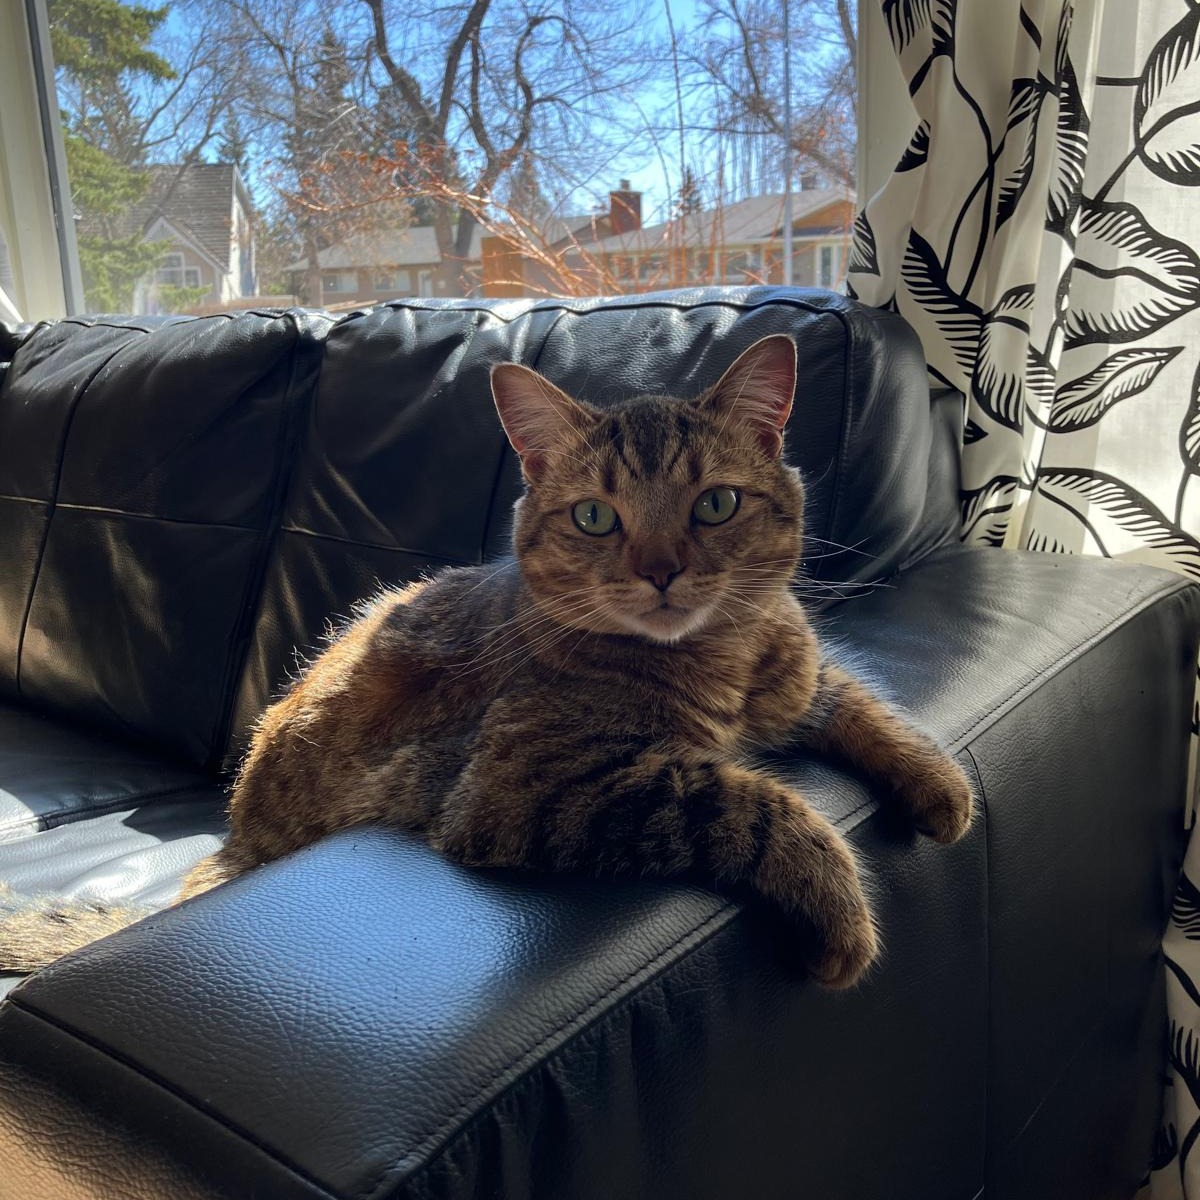 Furbaby Friday!
Let me introduce you to Toki.  One of Calgary-Acadia office team pets!
Now that warm weather has arrived, he has discovered the joy of 'Spidermanning' screen doors.
#yycAcadia #catsofinstagram